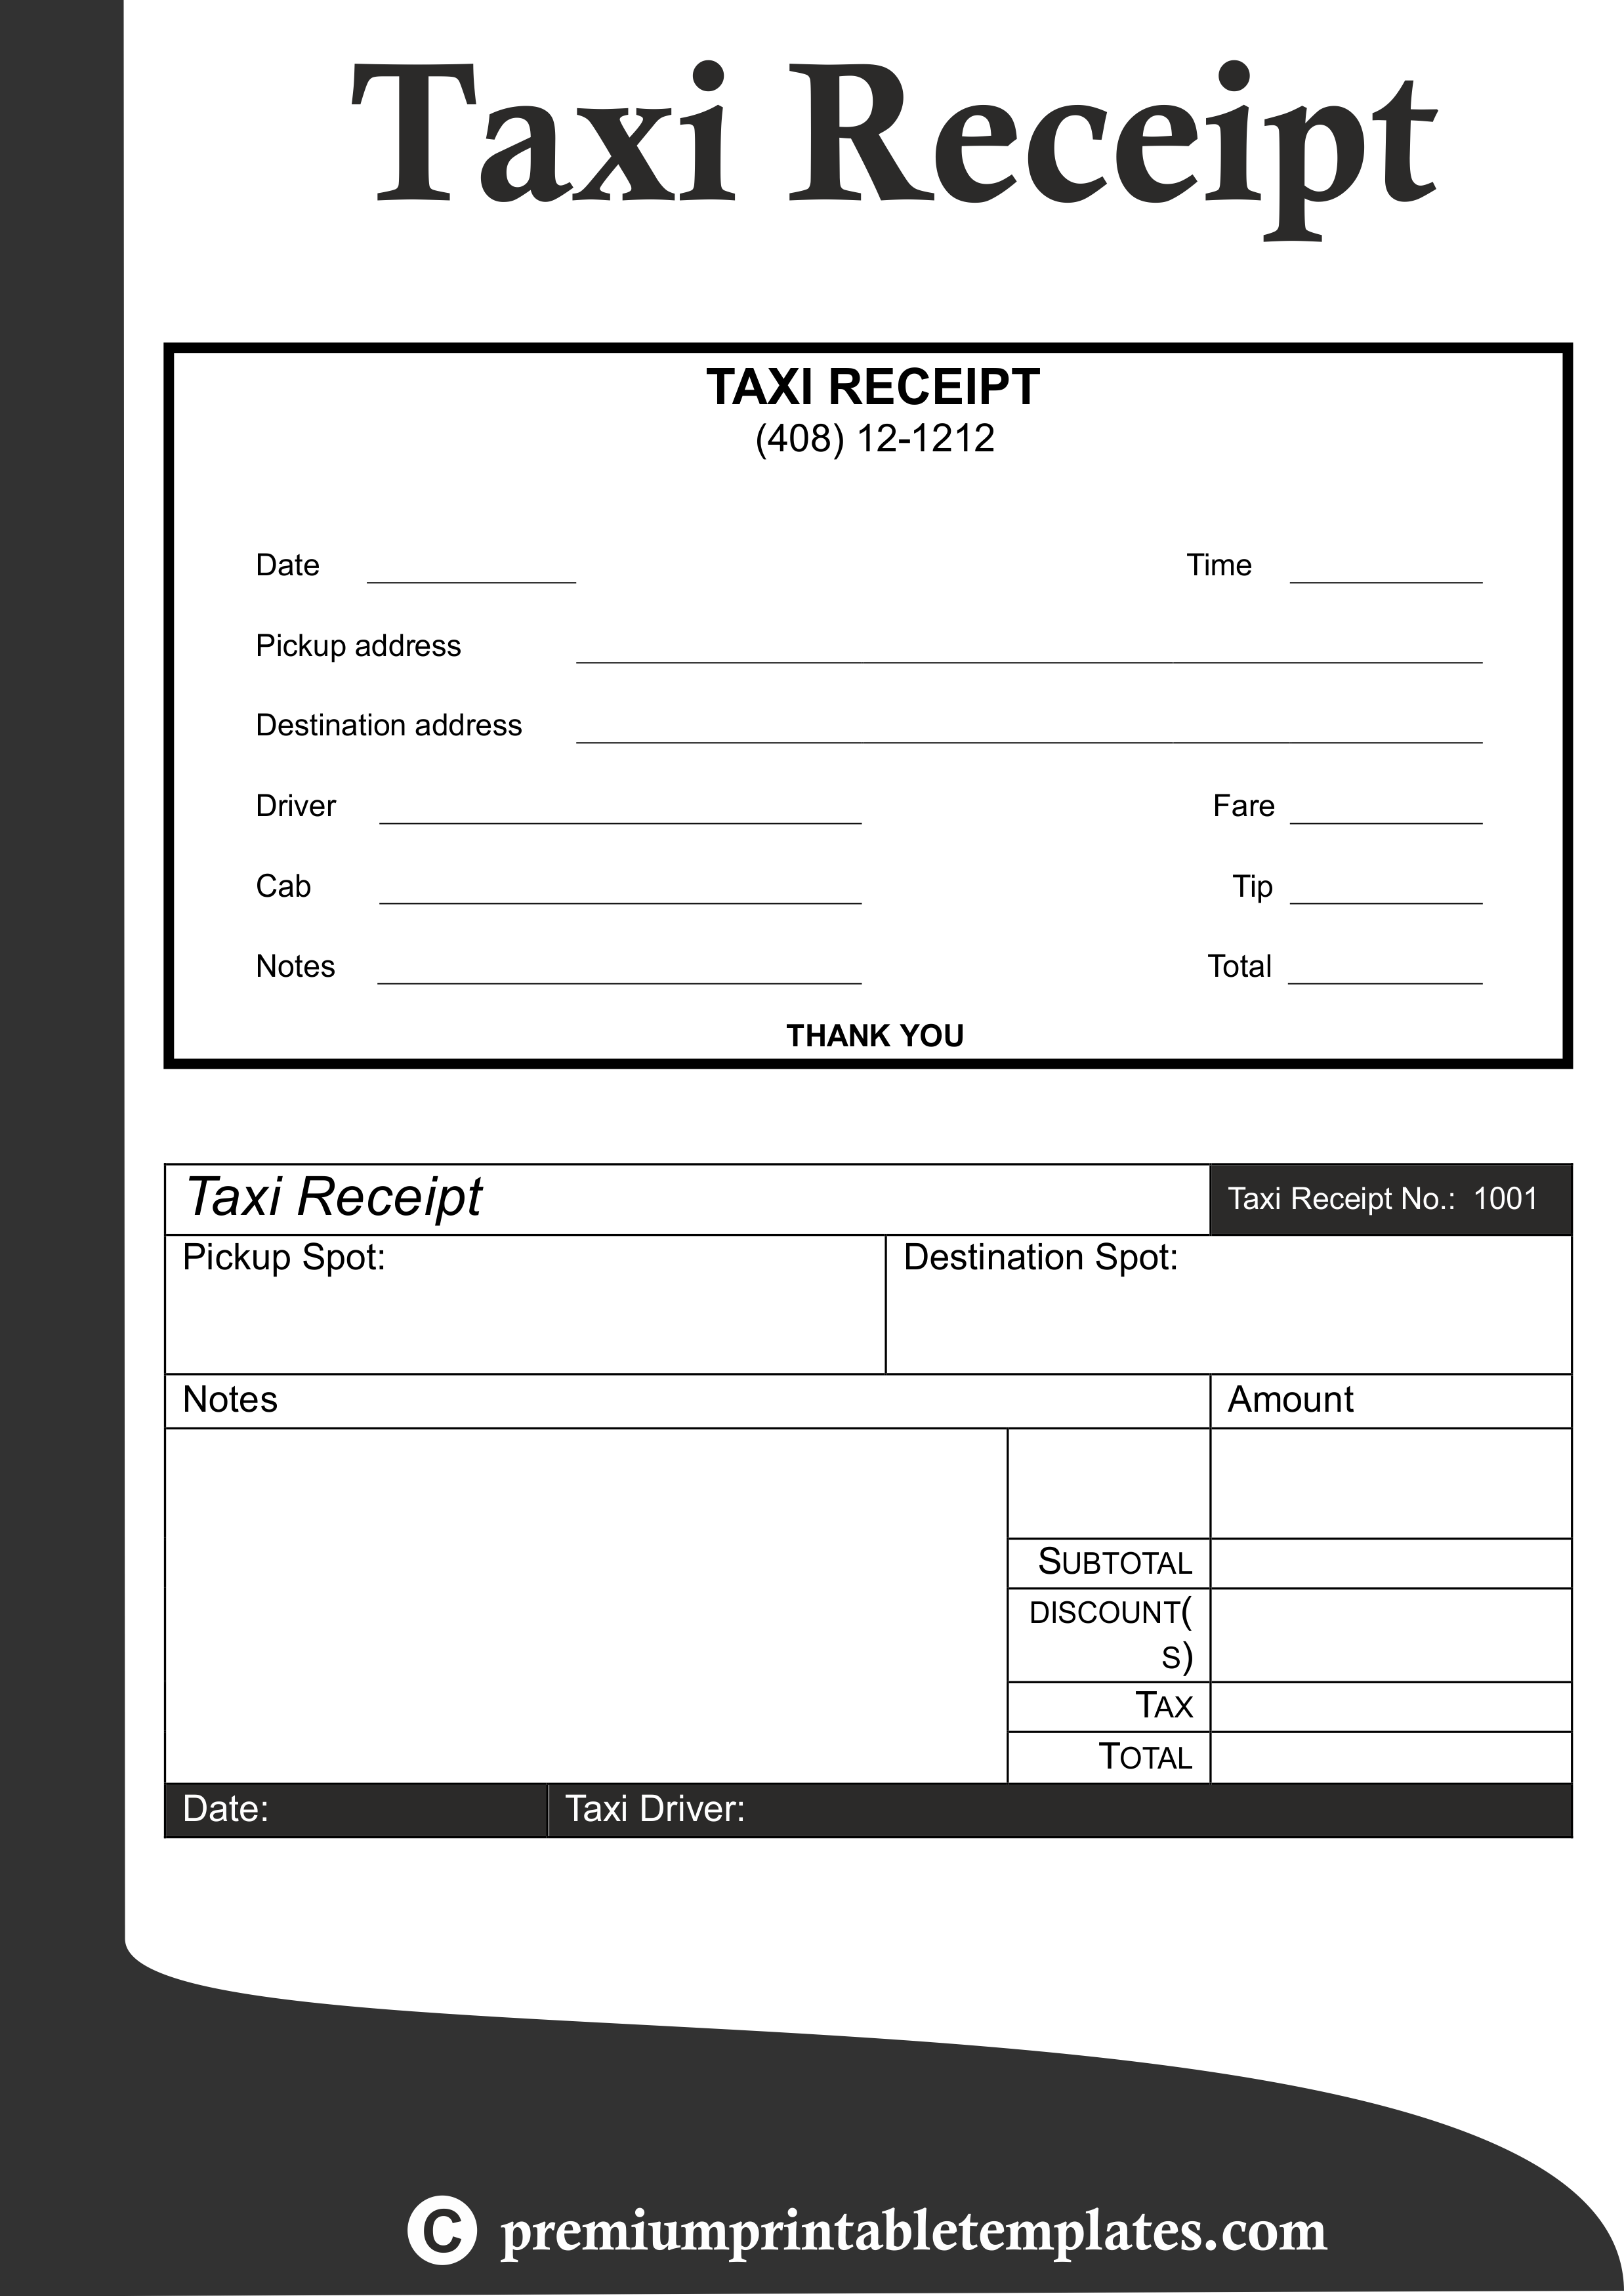 Chicago Globe Taxi Receipt Template